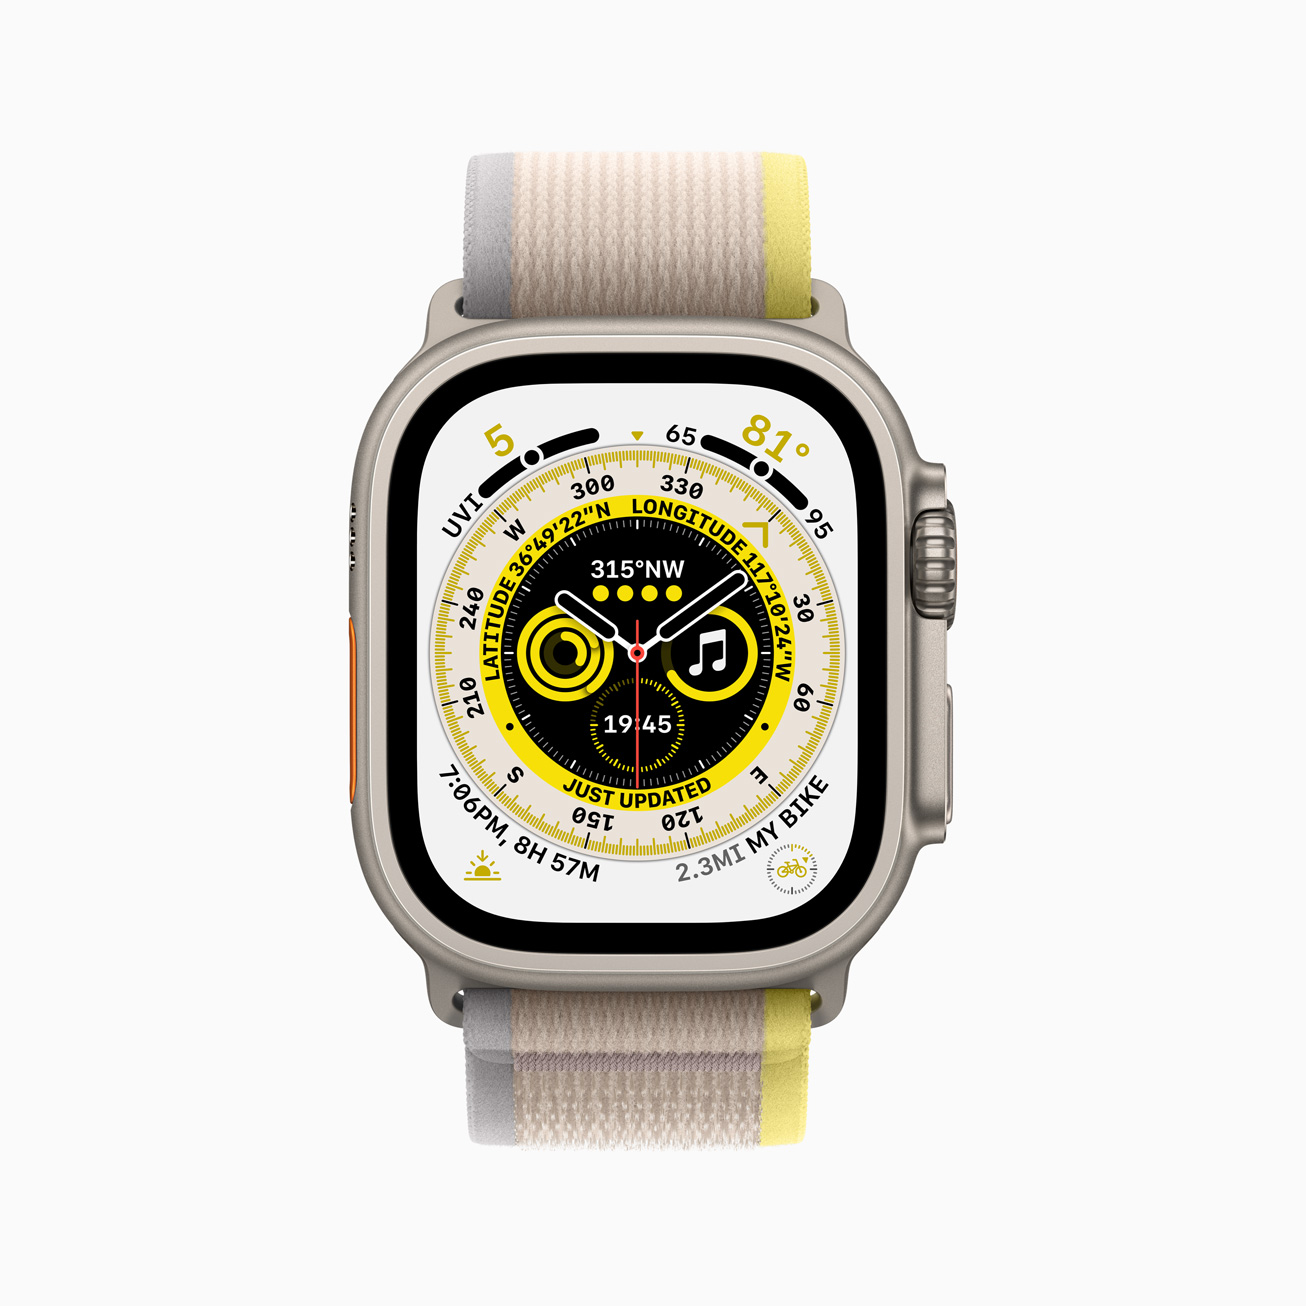 TECH REVIEW: APPLE WATCH ULTRA | Five Towns College